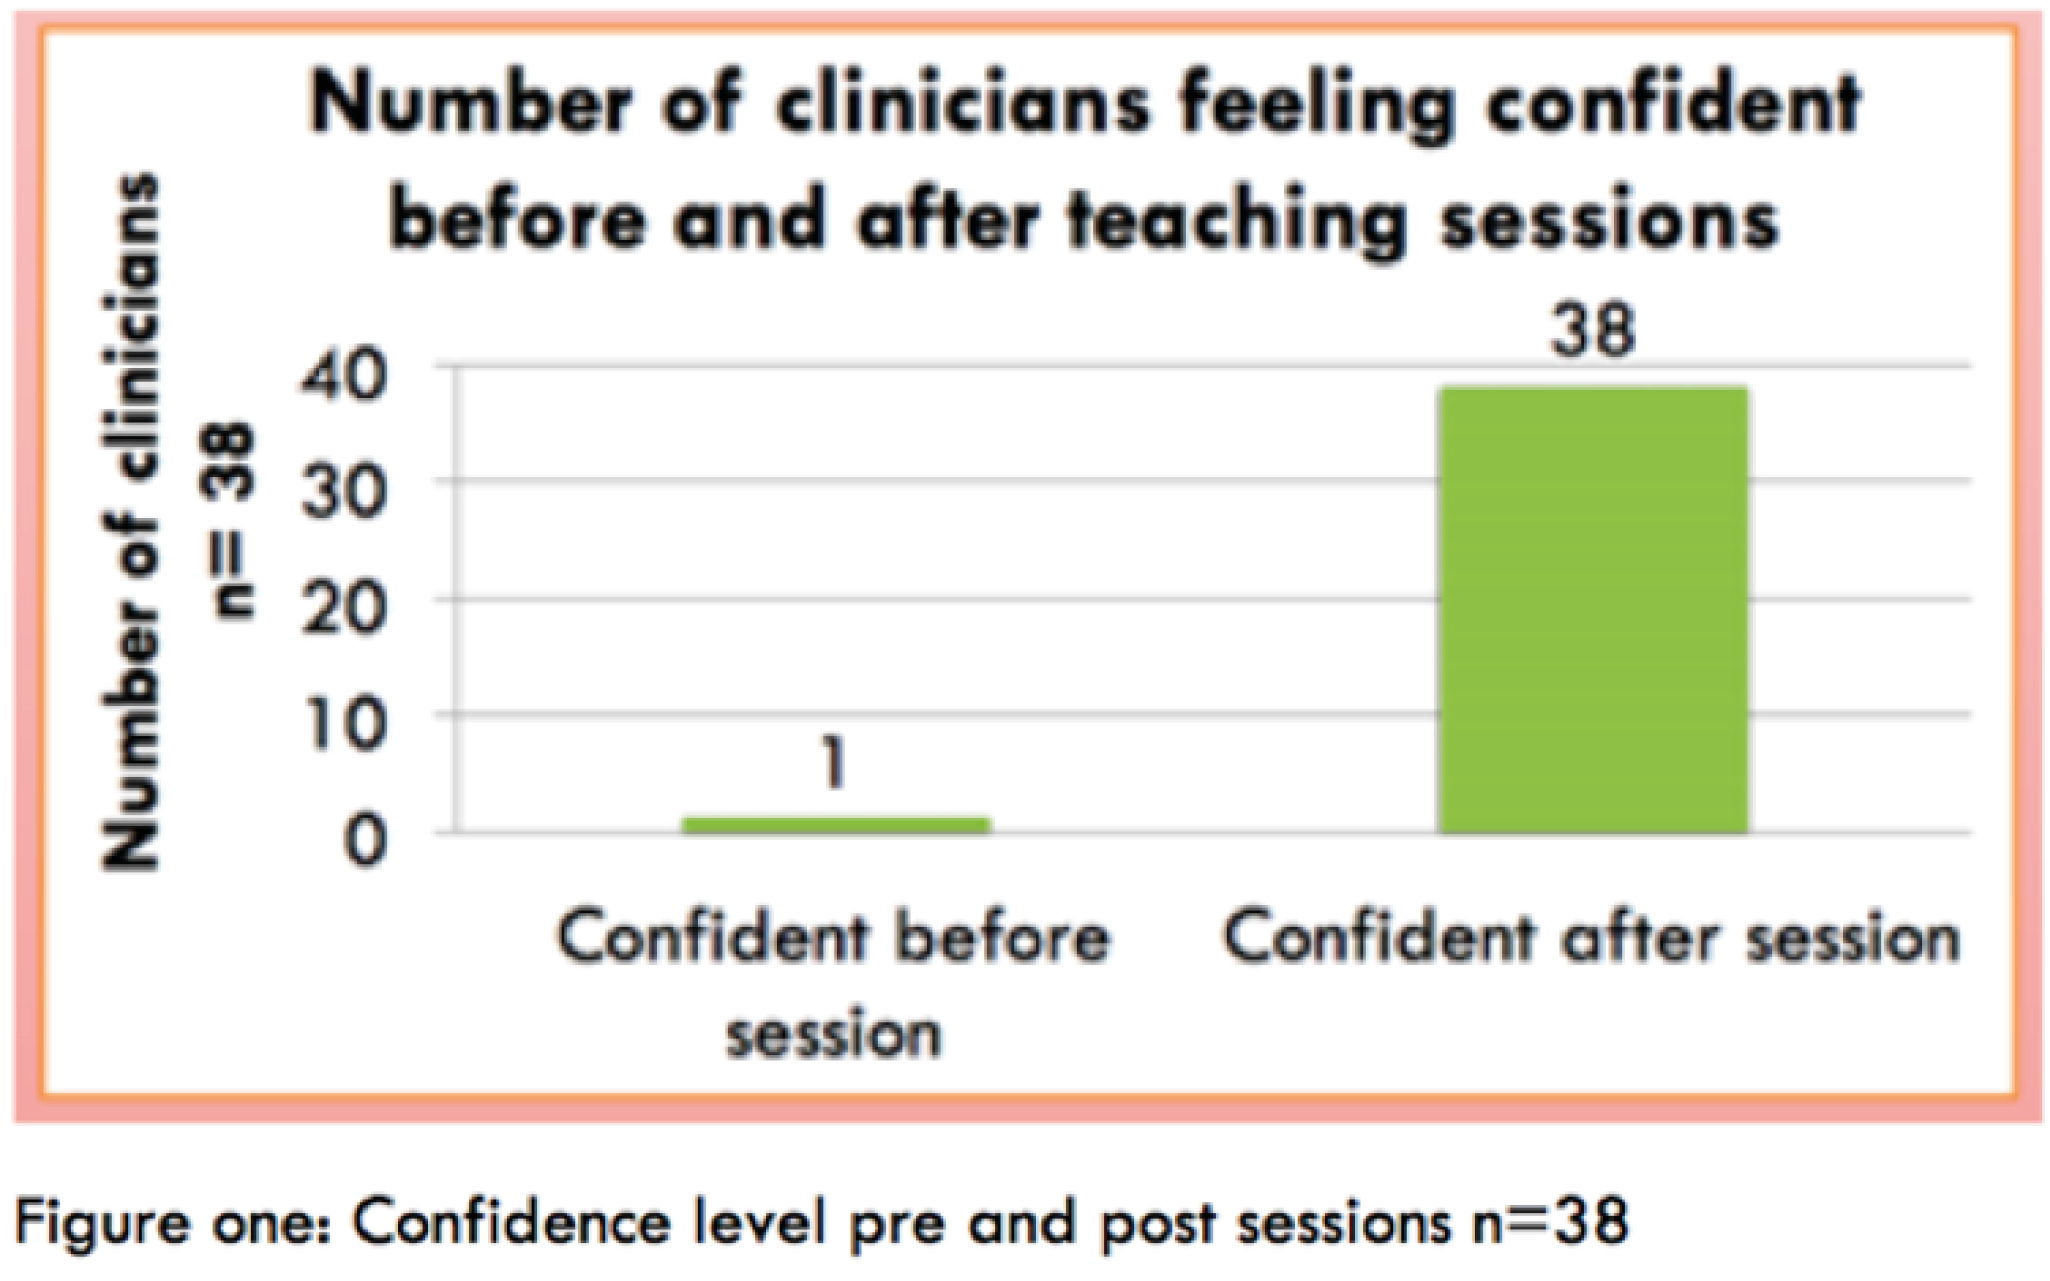 Confidence level pre- and post-sessions, n = 38